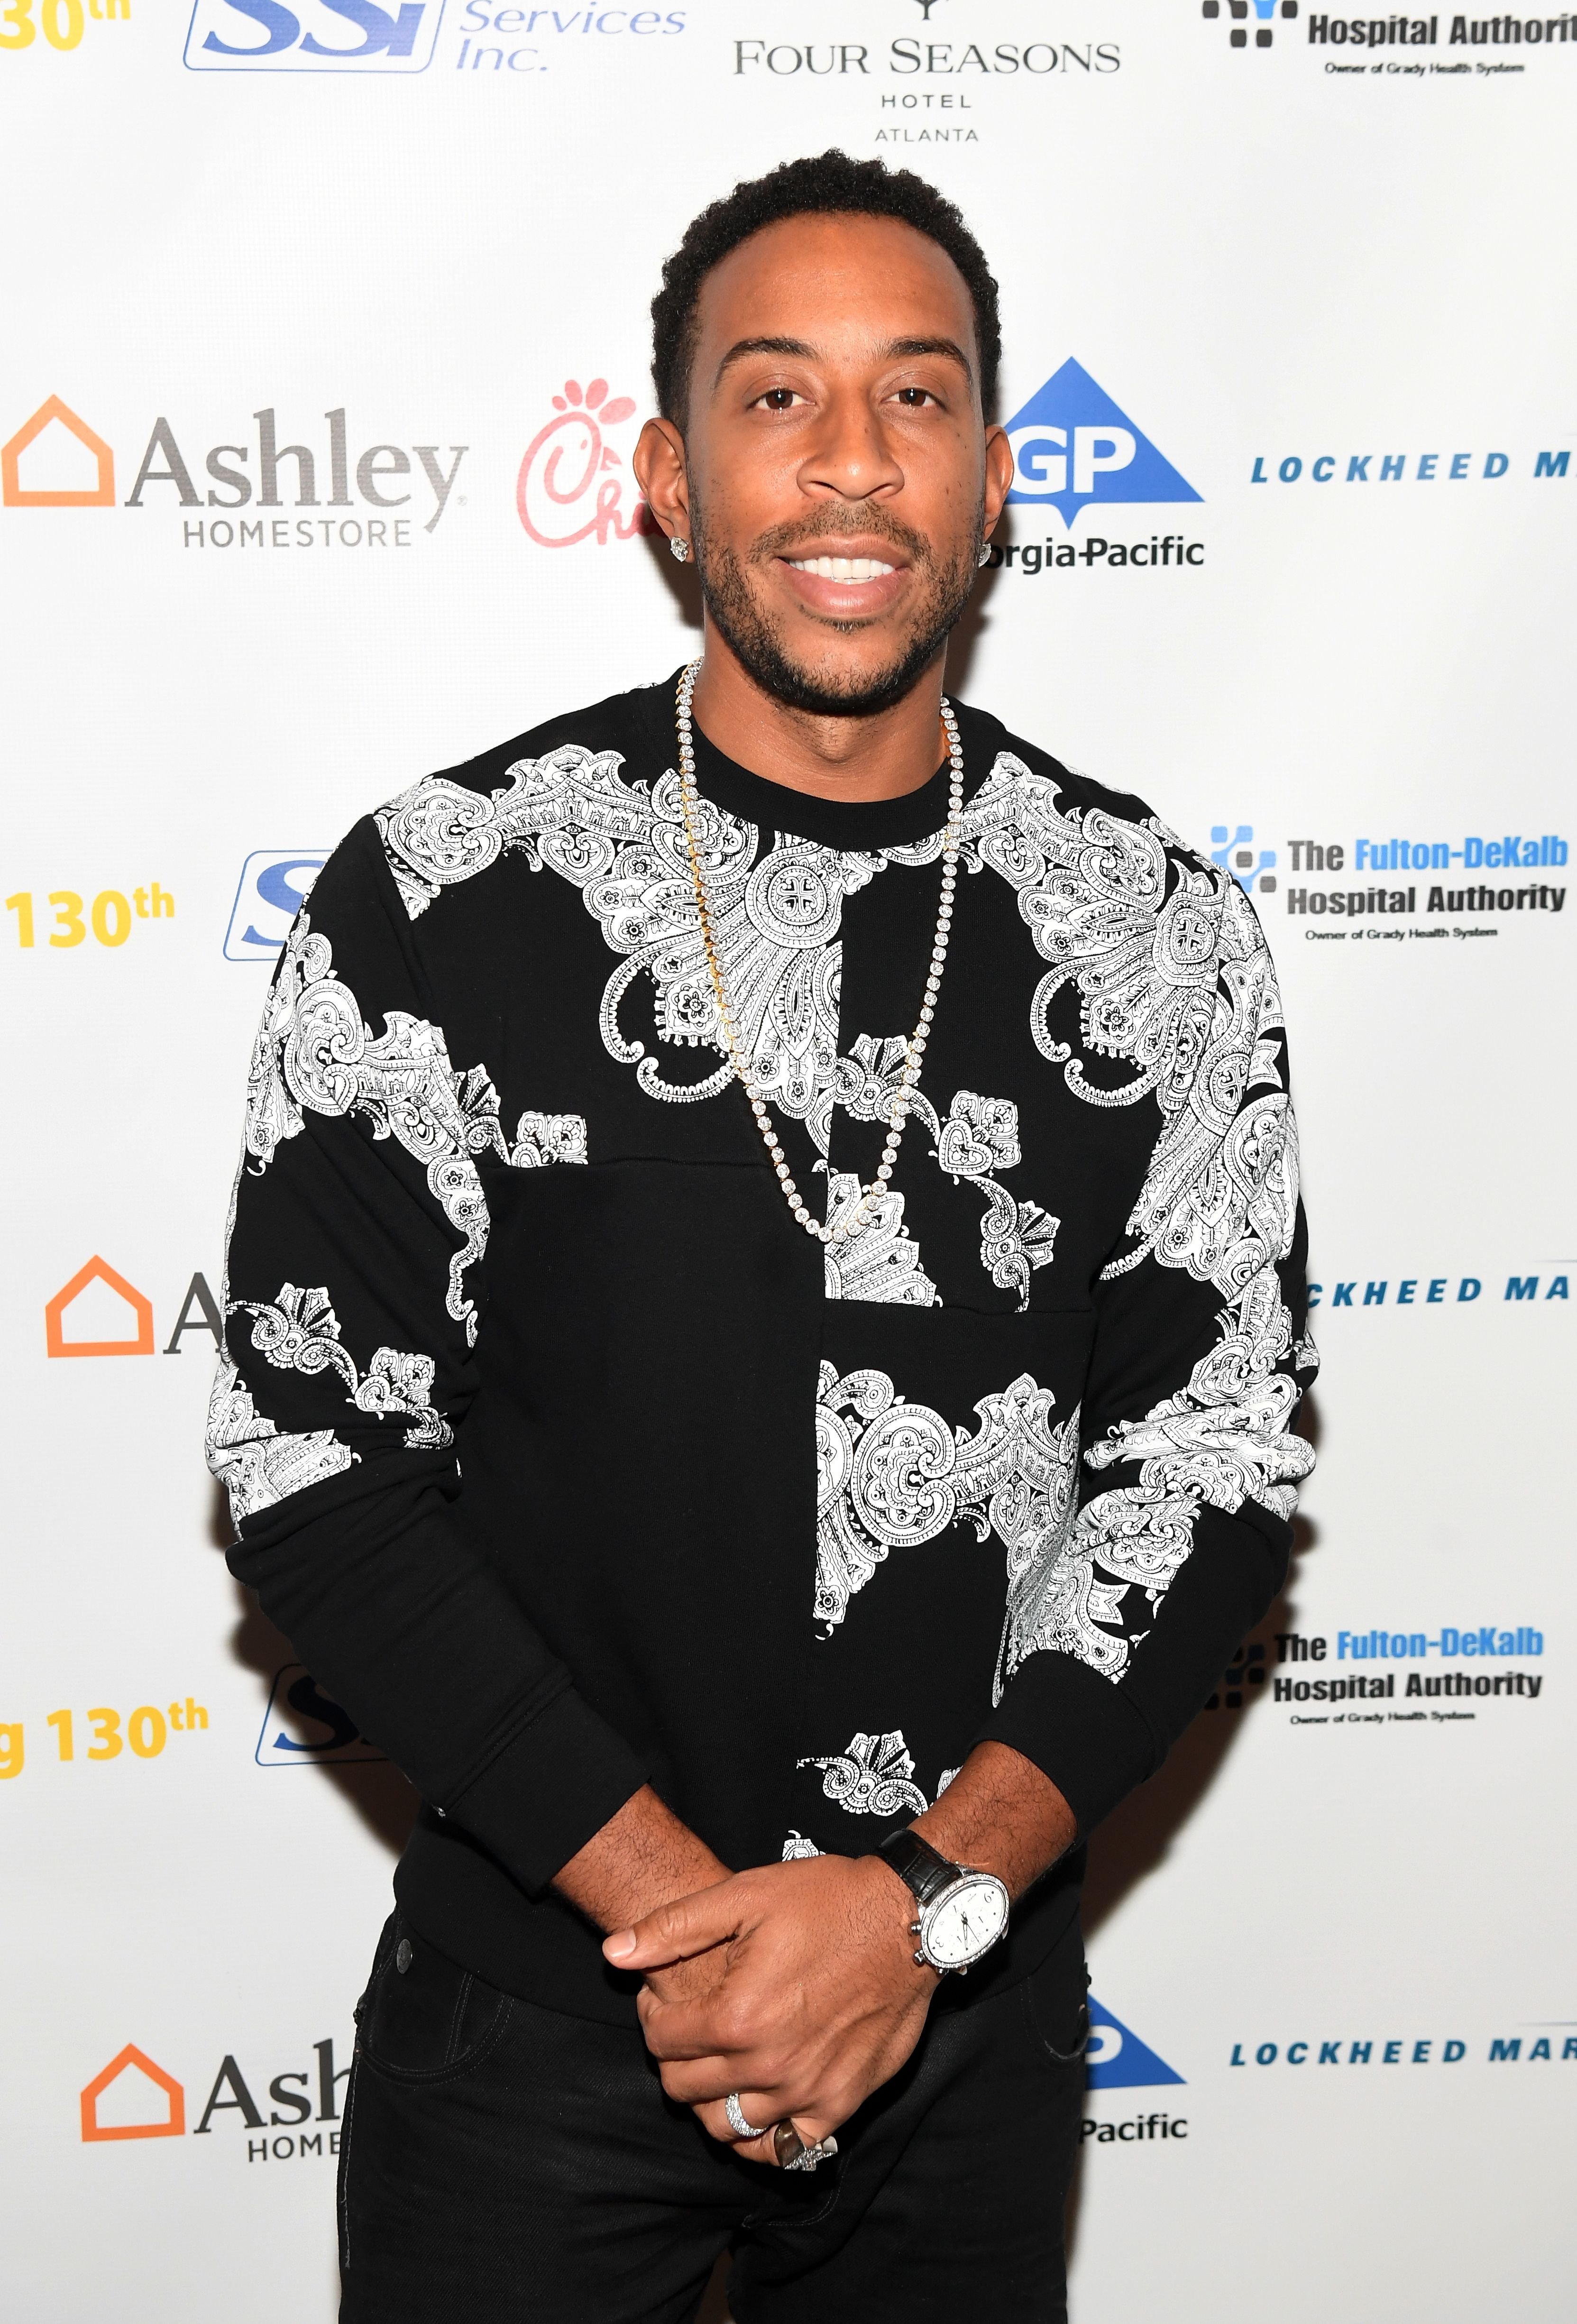 Ludacris during the Carrie Steele-Pitts Home 130th Anniversary Gala at Four Seasons Hotel on March 24, 2018 in Atlanta, Georgia. | Source: Getty Images